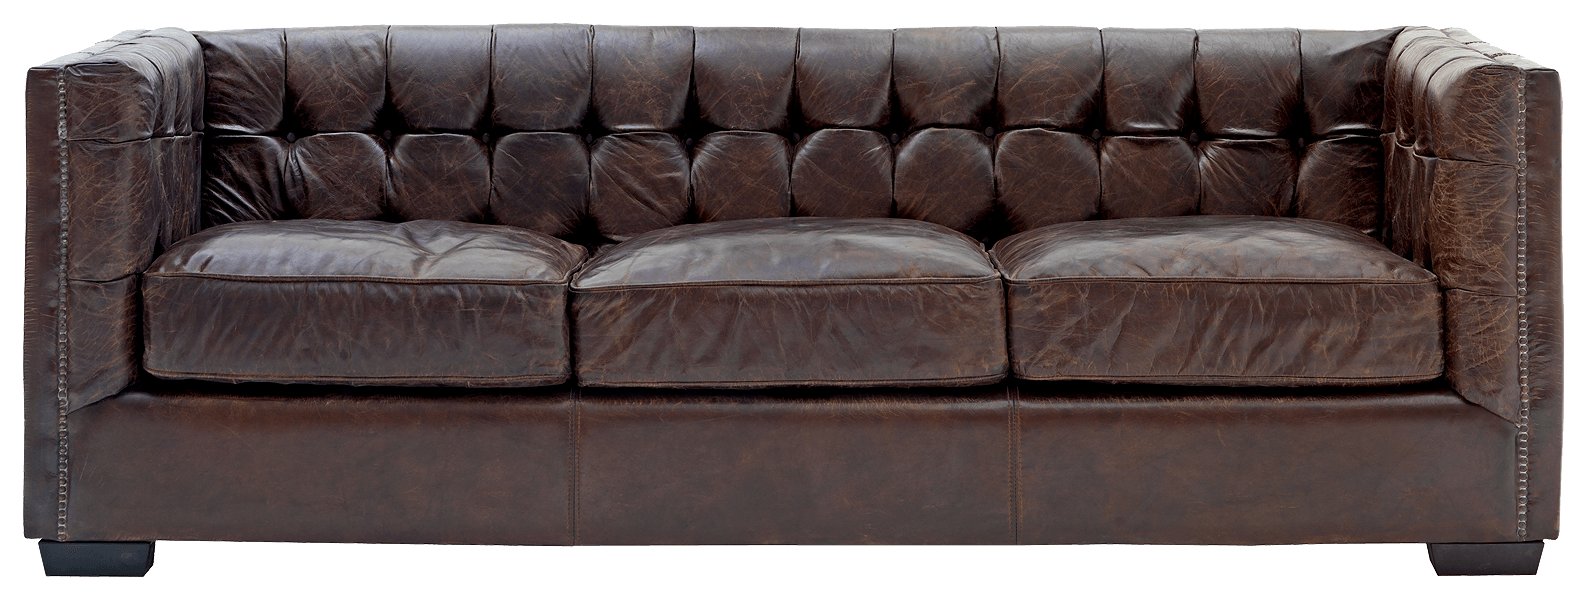 Transparent png stickpng. Couch clipart leather sofa